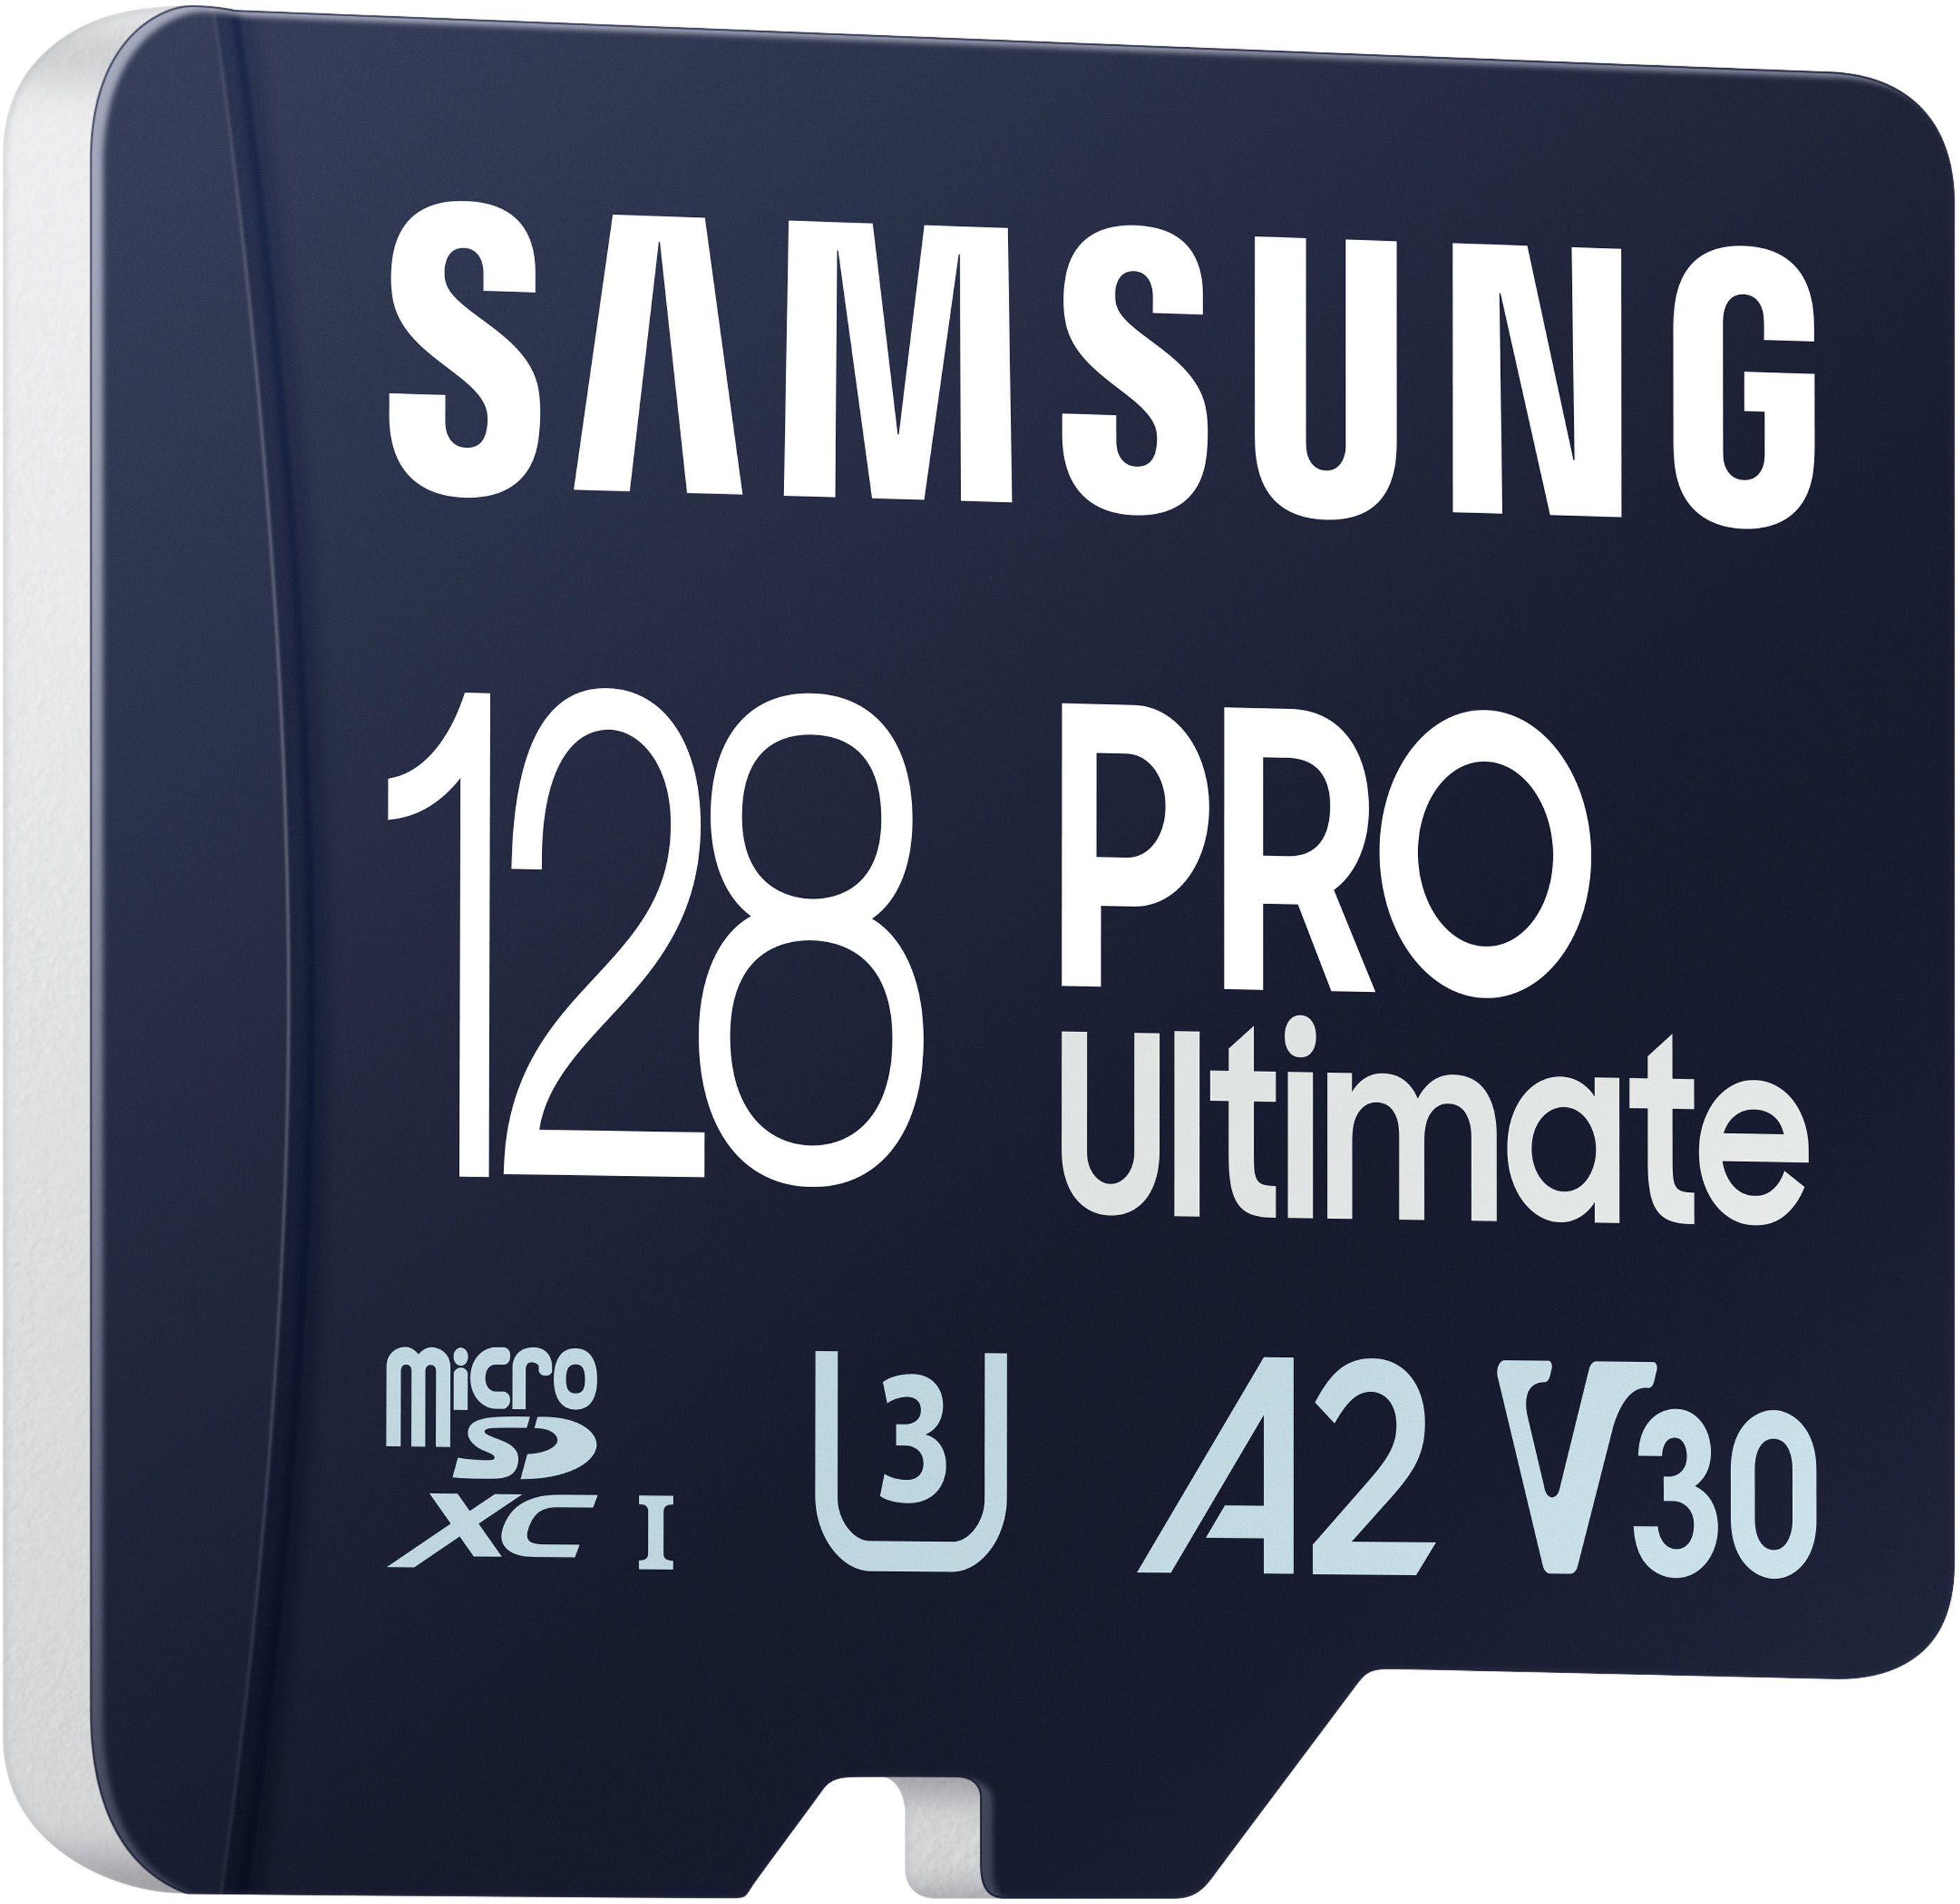 Samsung Pro Ultimate 128GB SDXC Memory Card MB-SY128S/AM - Best Buy